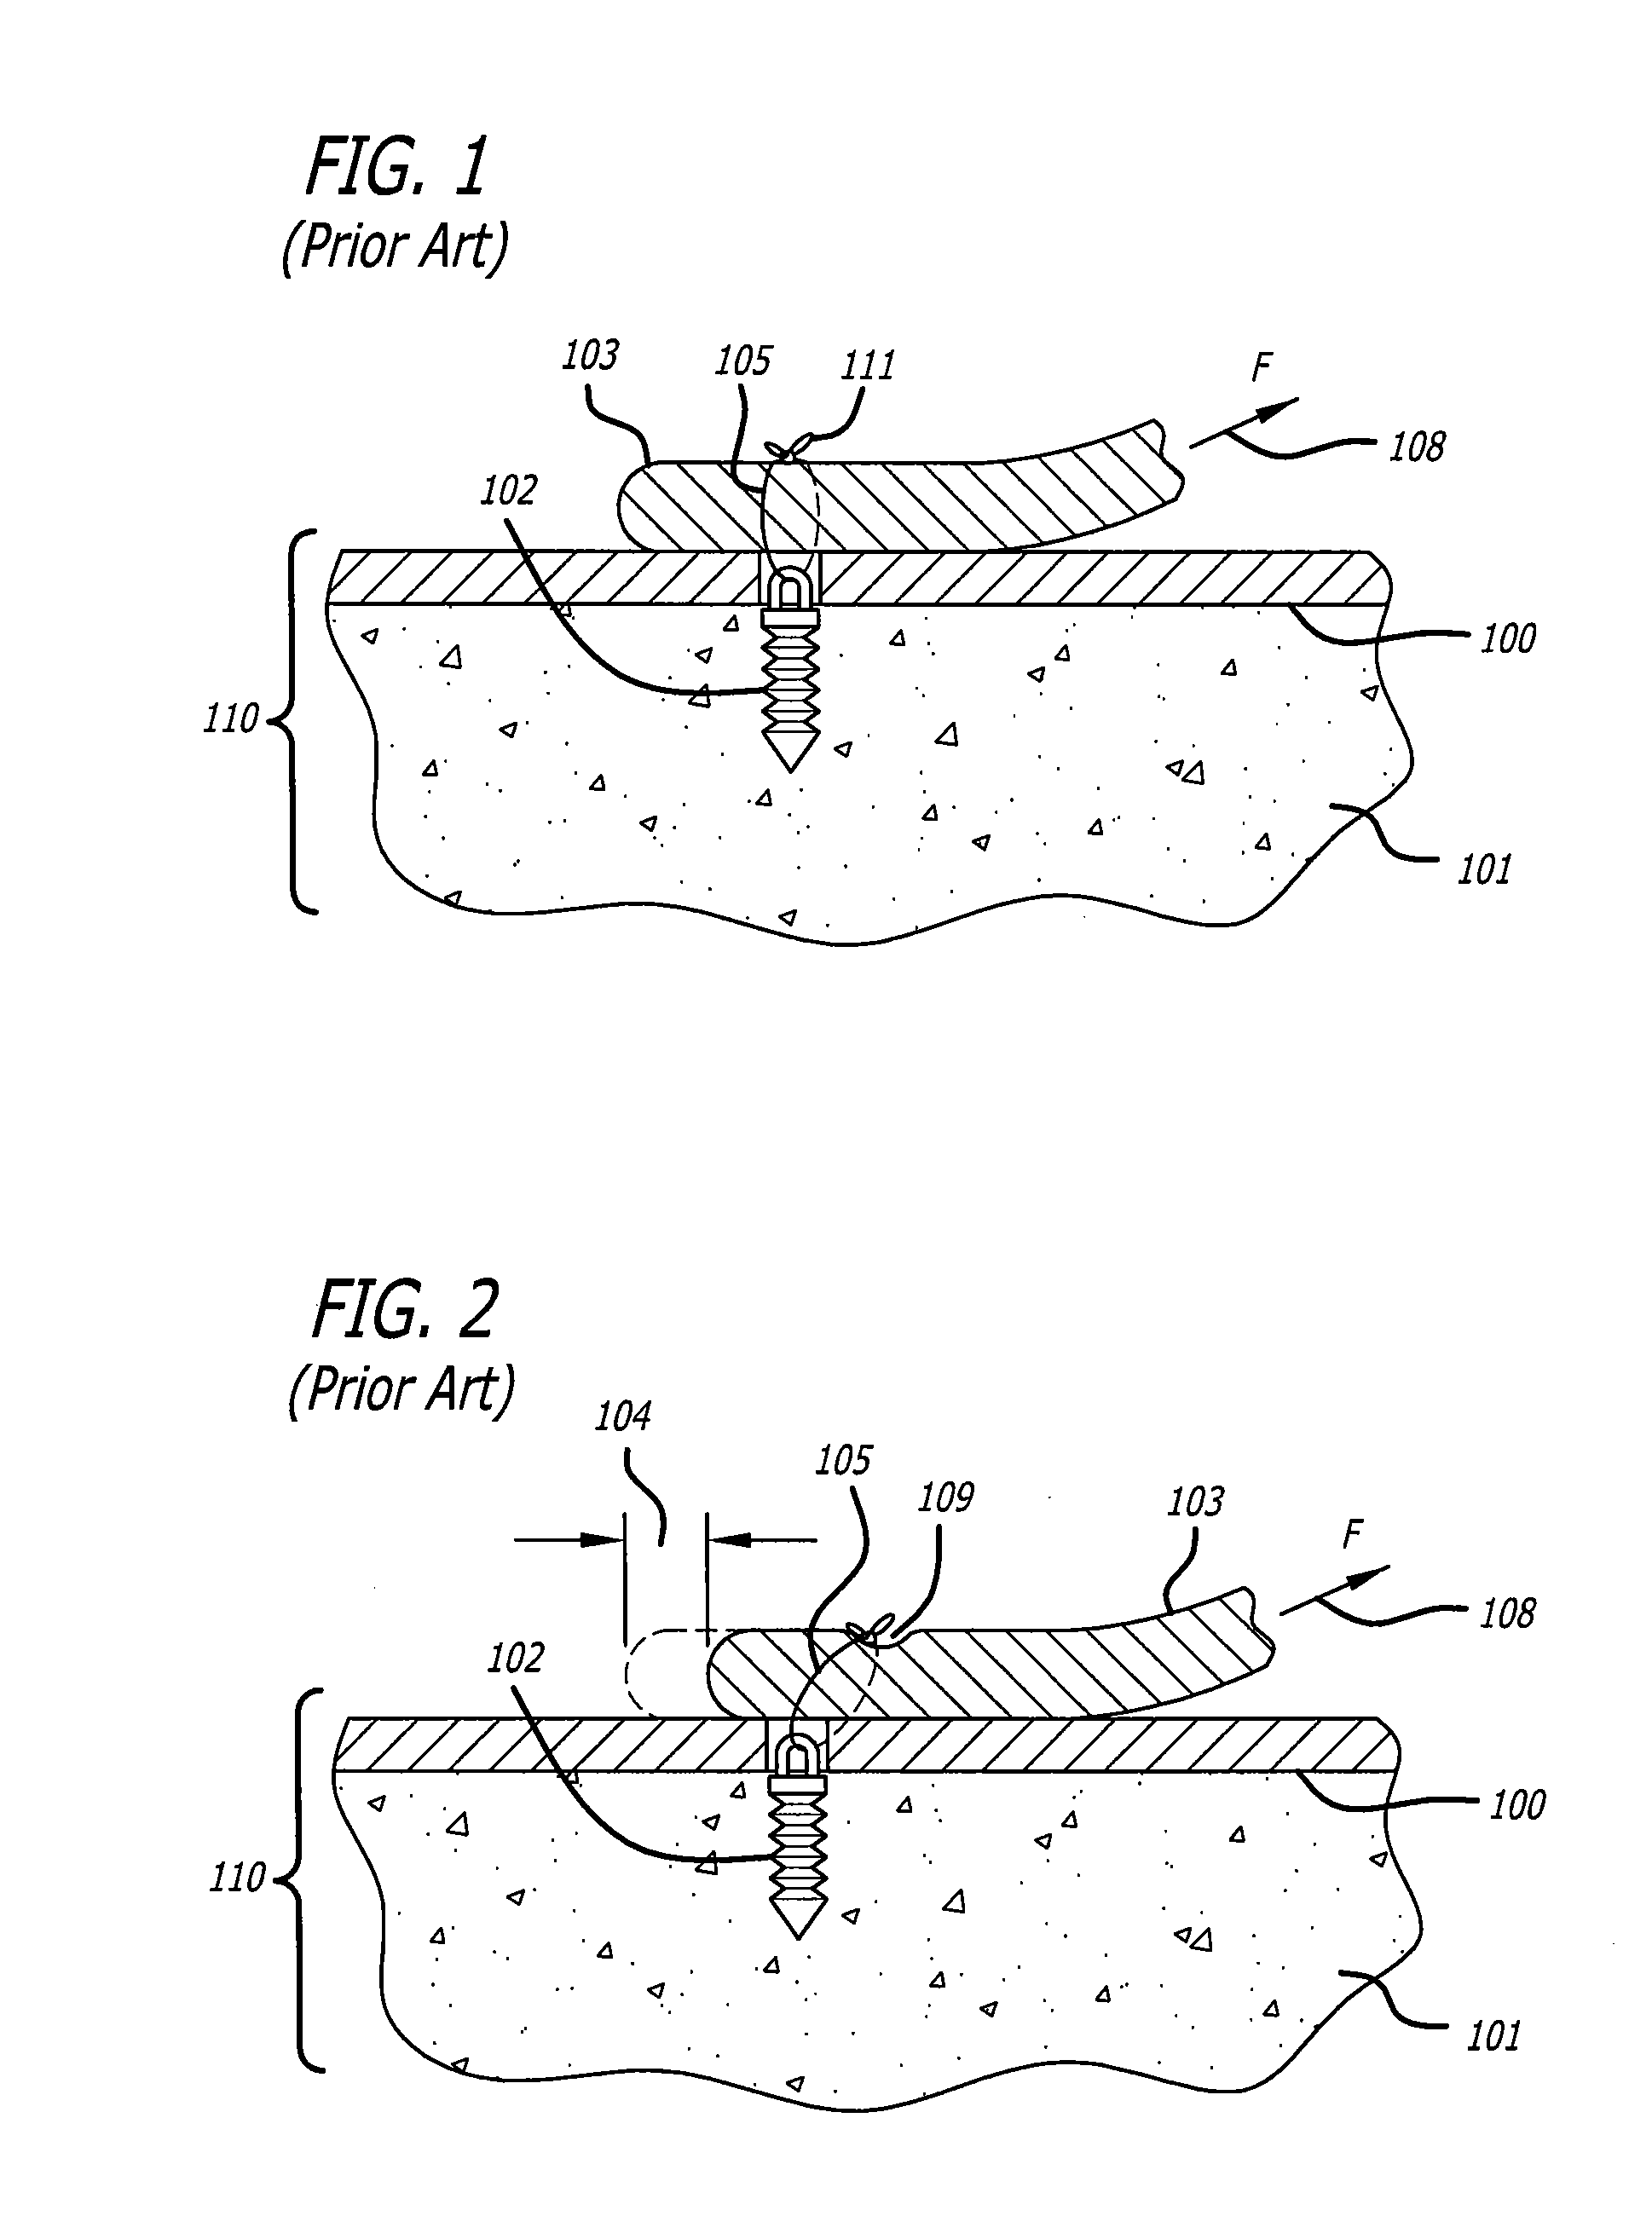 Knotless suture anchor for soft tissue repair and method of use